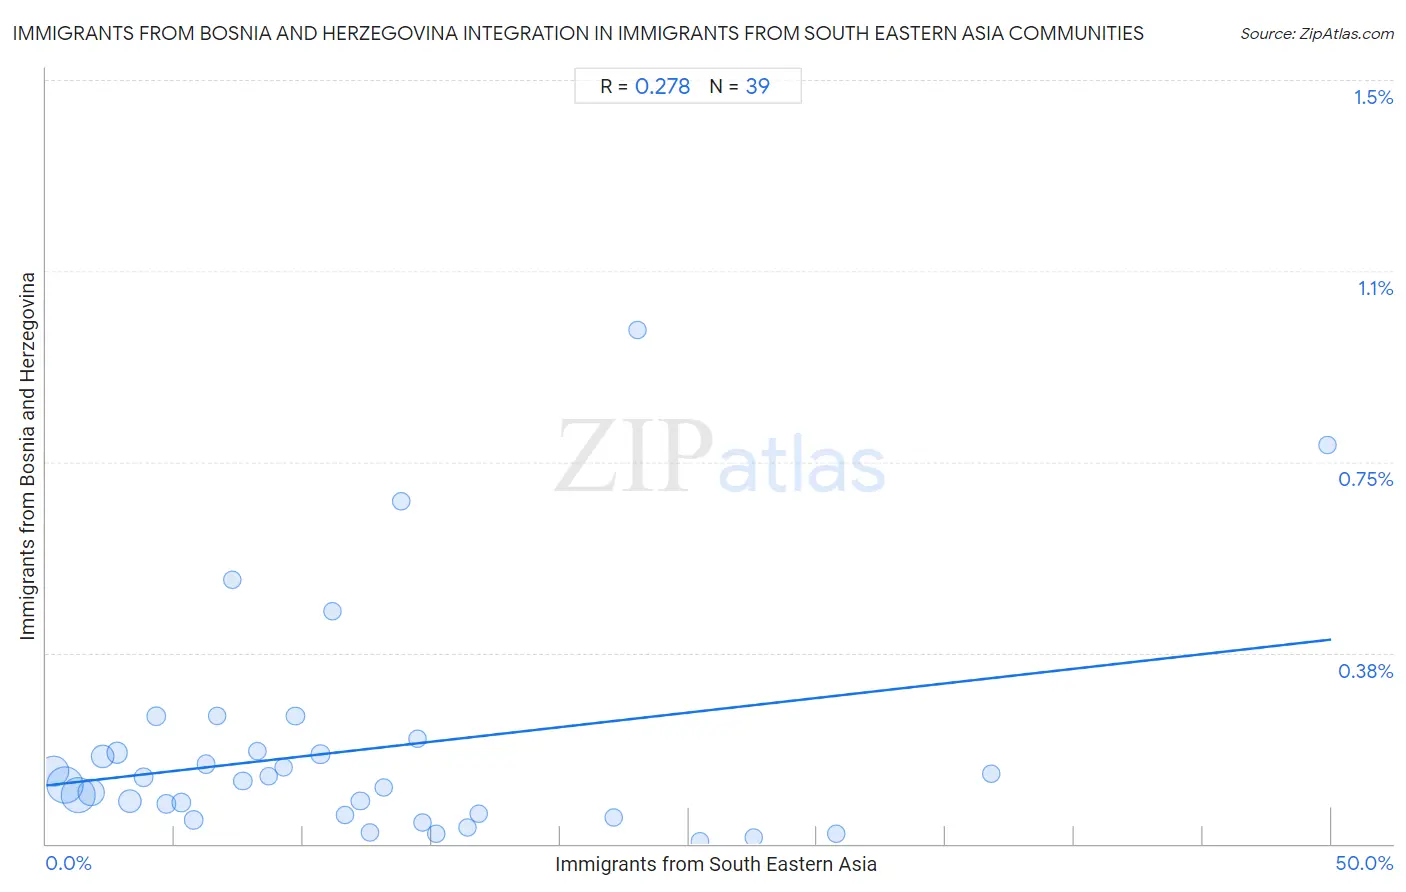 Immigrants from South Eastern Asia Integration in Immigrants from Bosnia and Herzegovina Communities